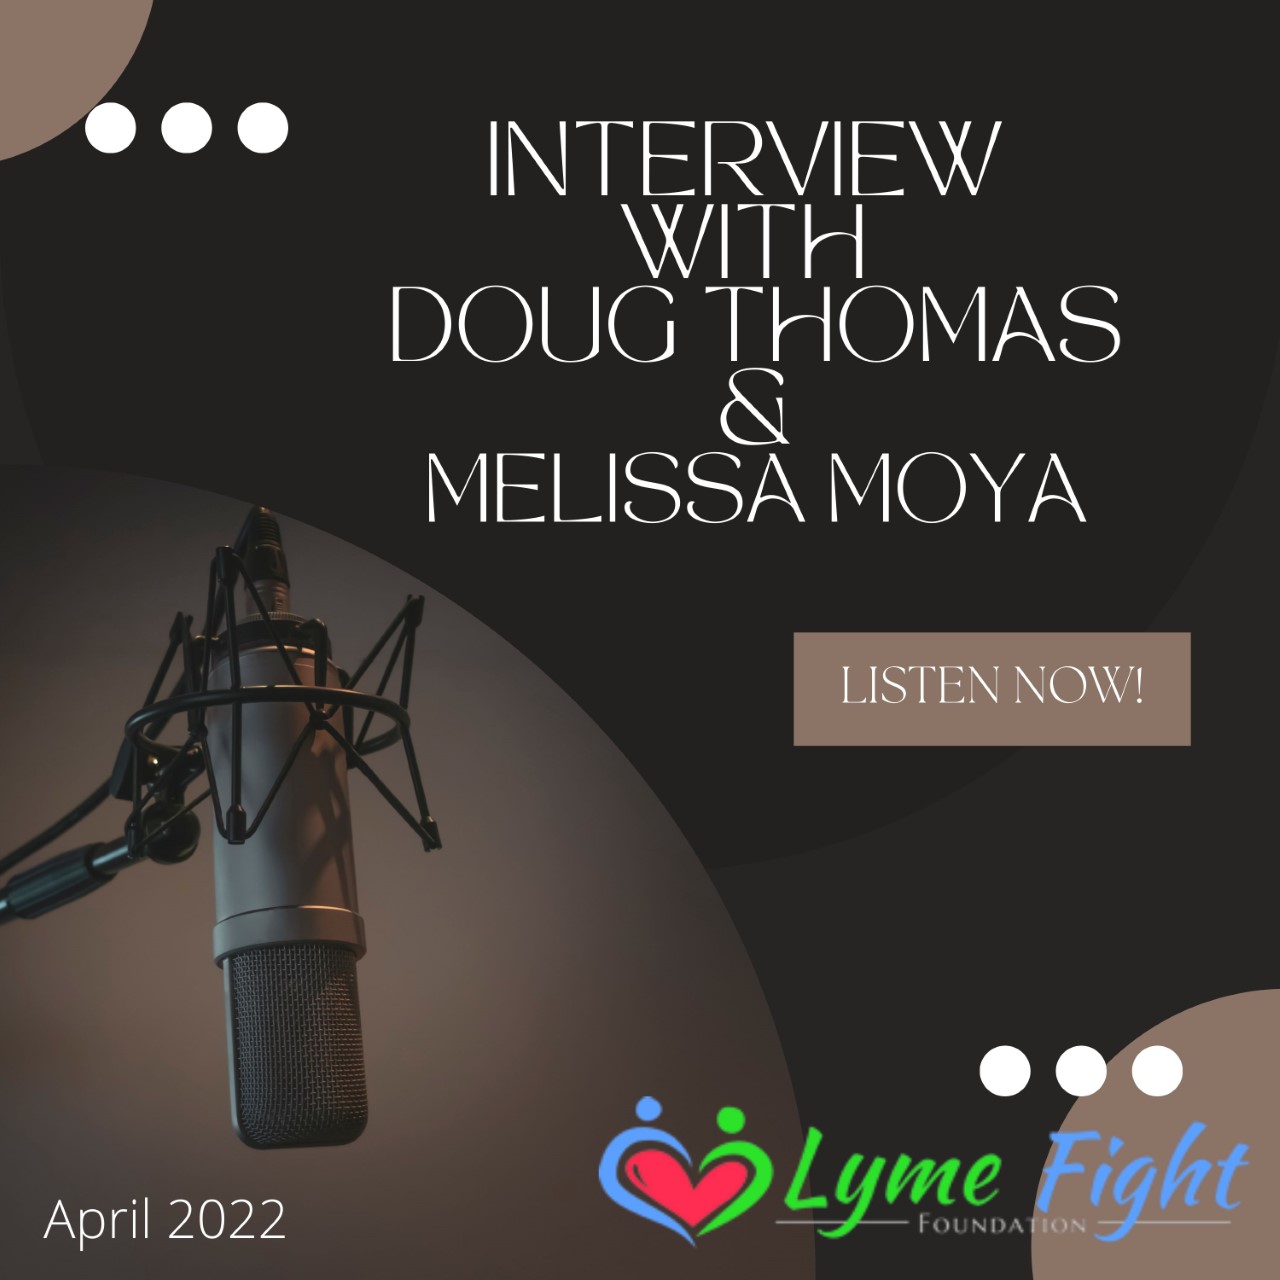 interview with doug thomas and meilssa moya